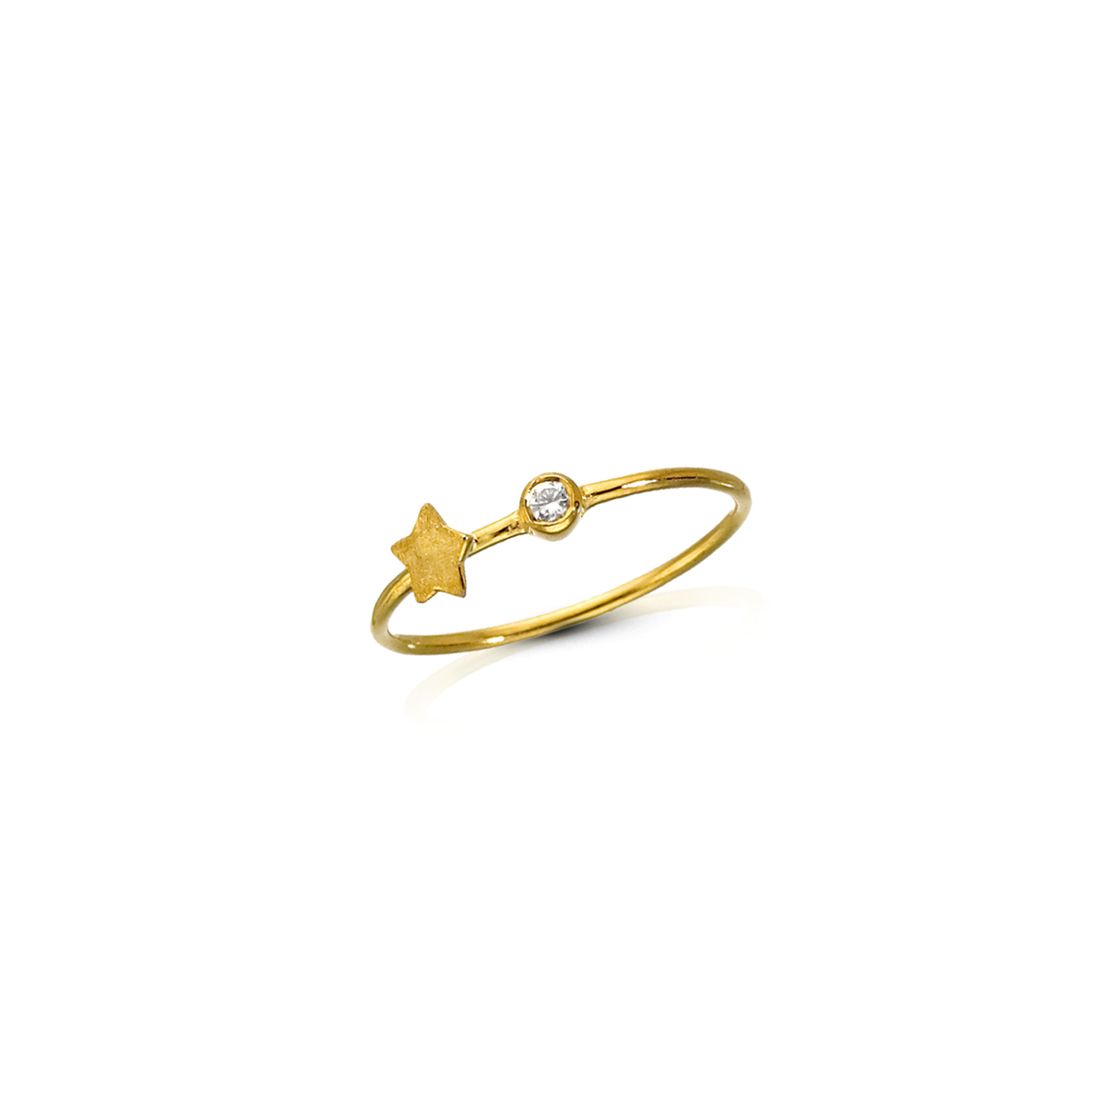 Simple gold band with white zircon stone and gold star.